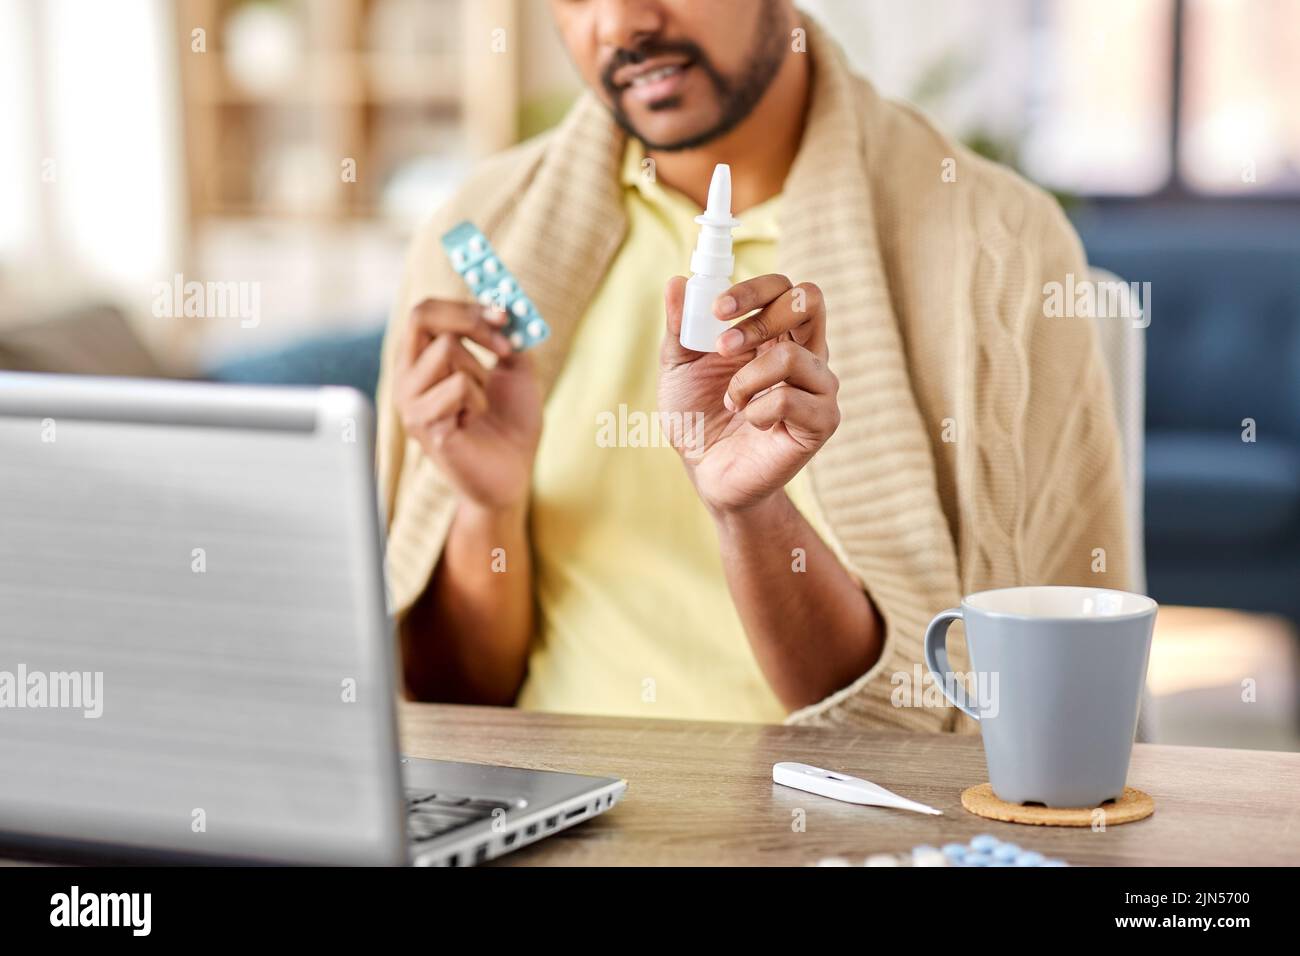 sick man thermometer having video call on laptop Stock Photo